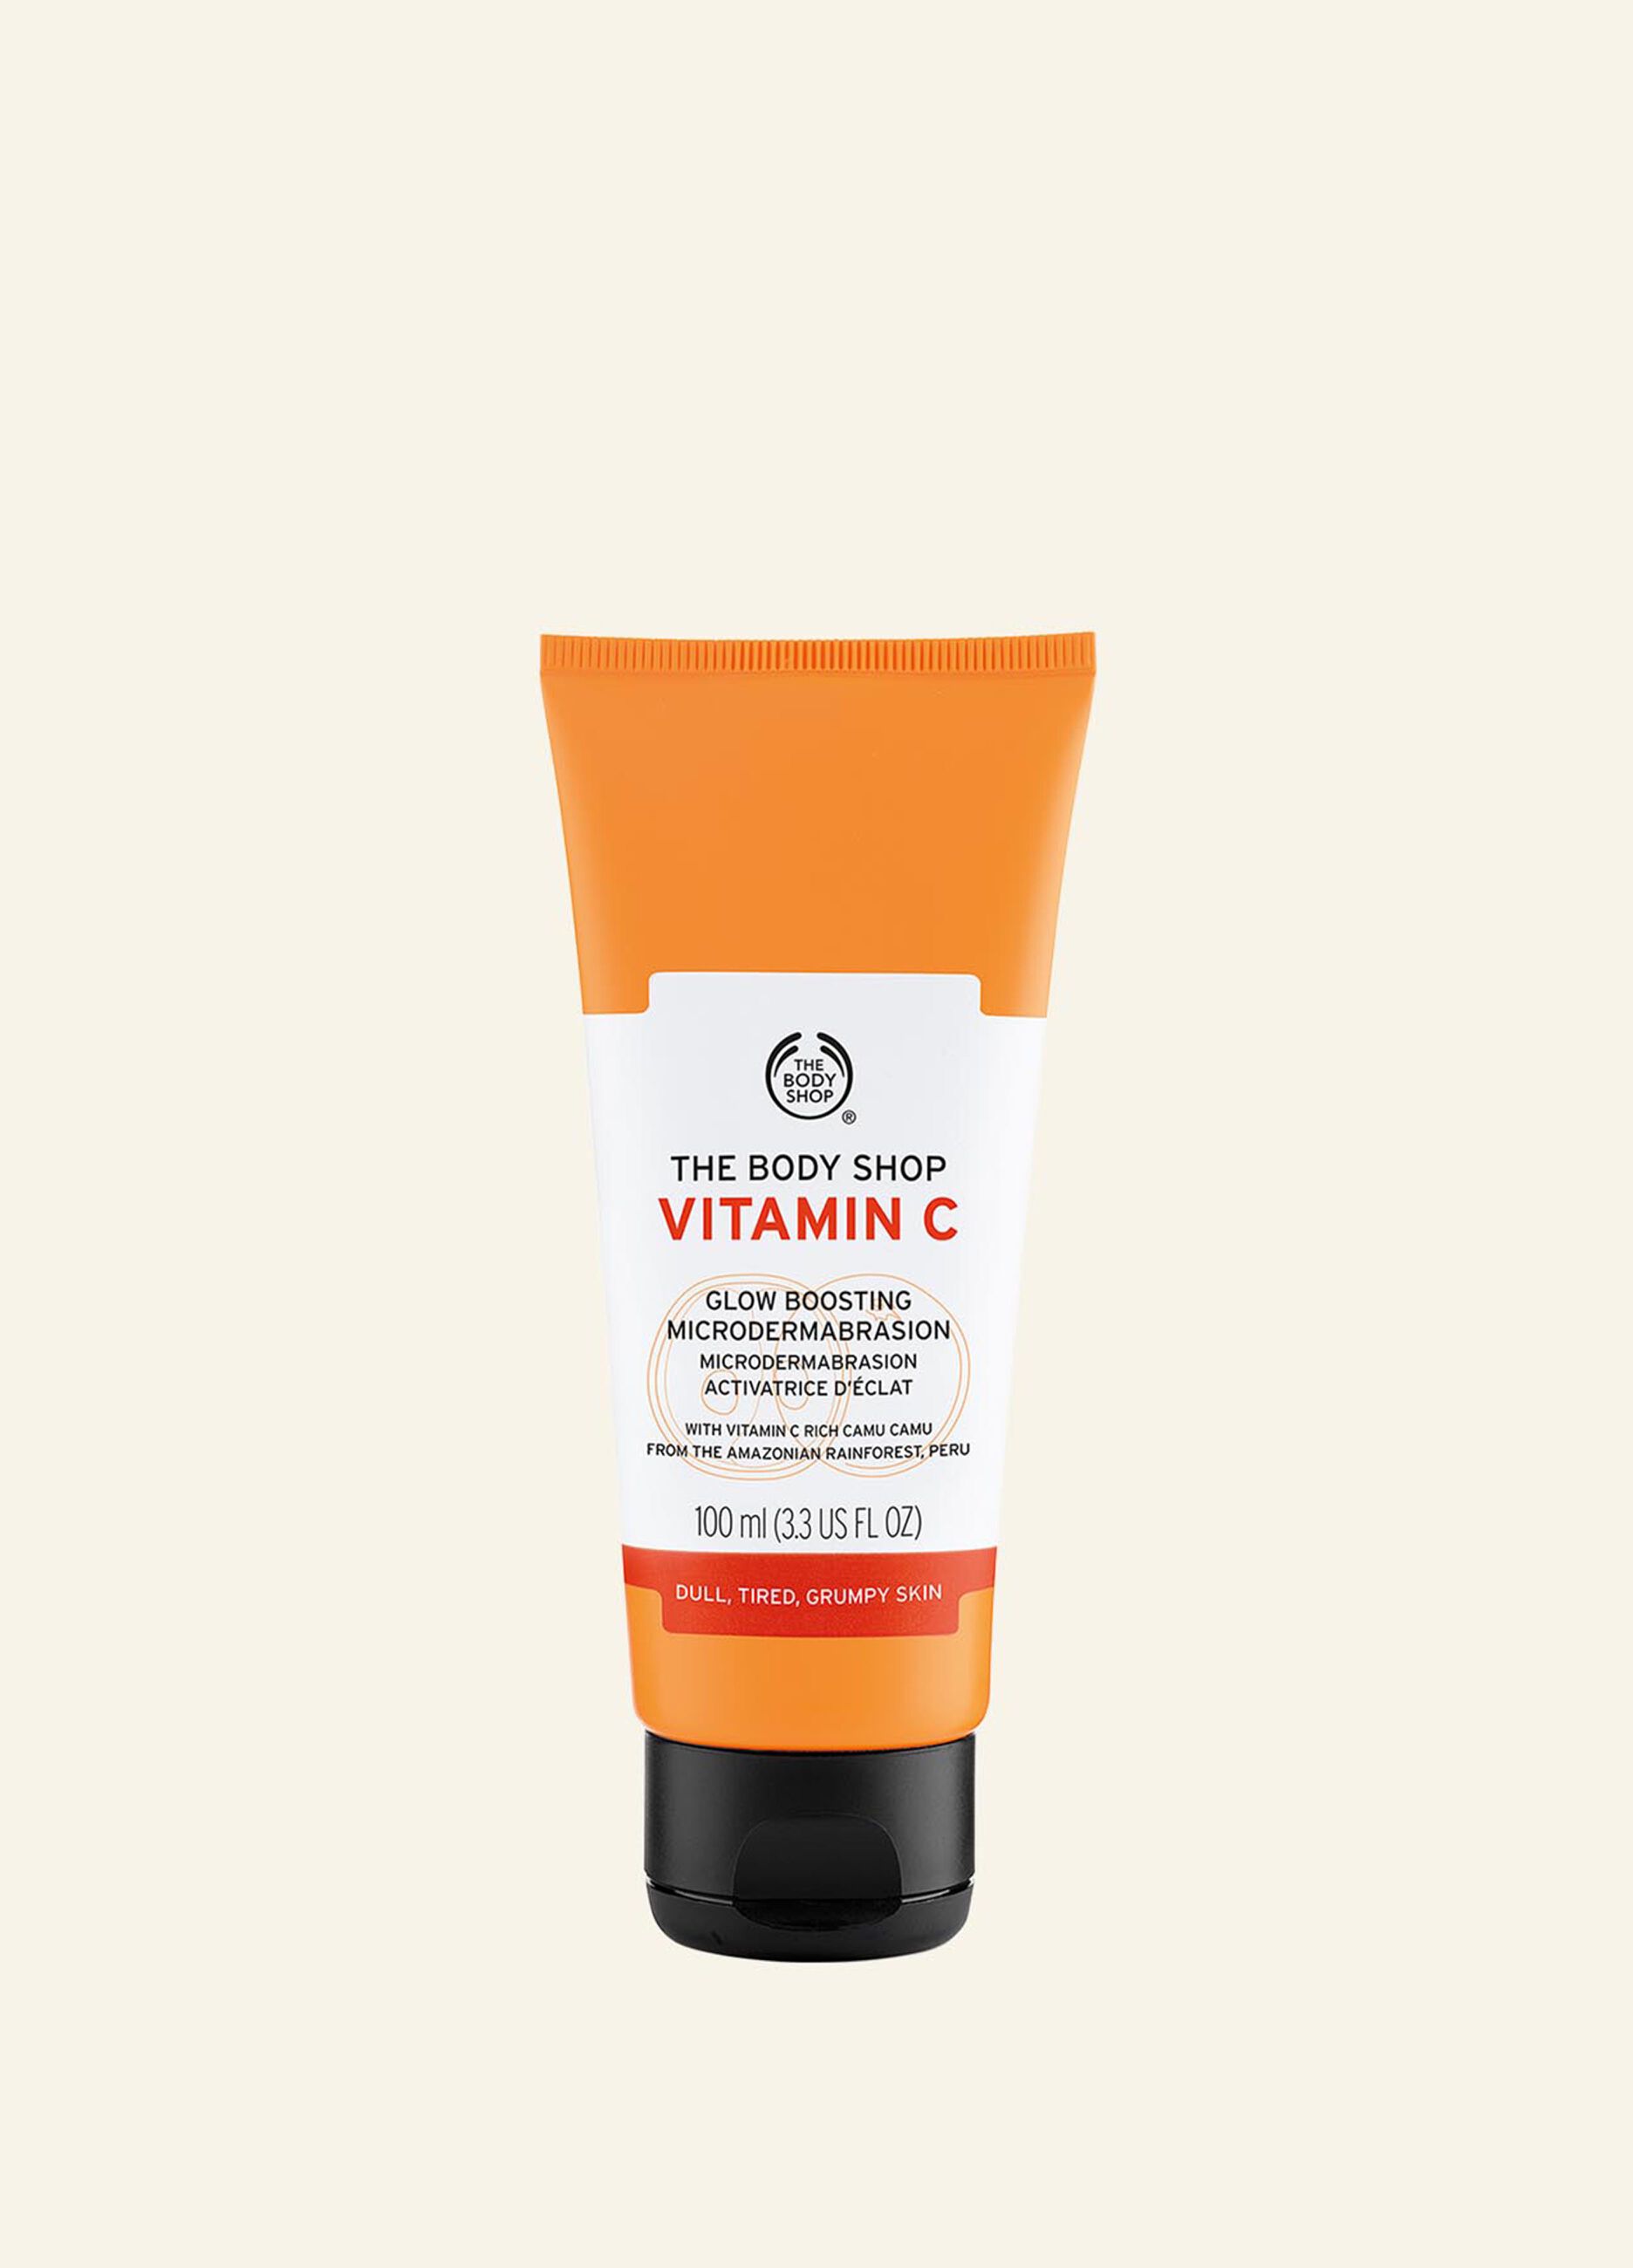 The Body Shop microdermabrasion with vitamin C